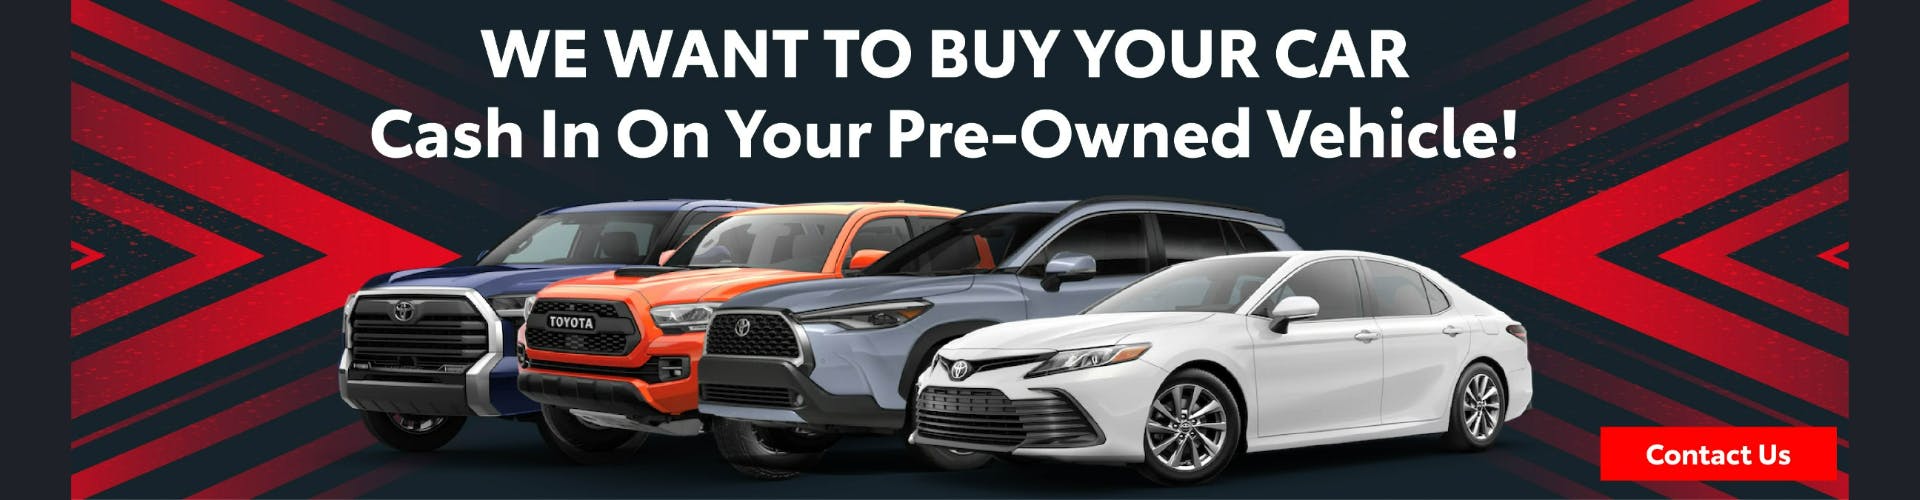 We Want to Buy Your Vehicle